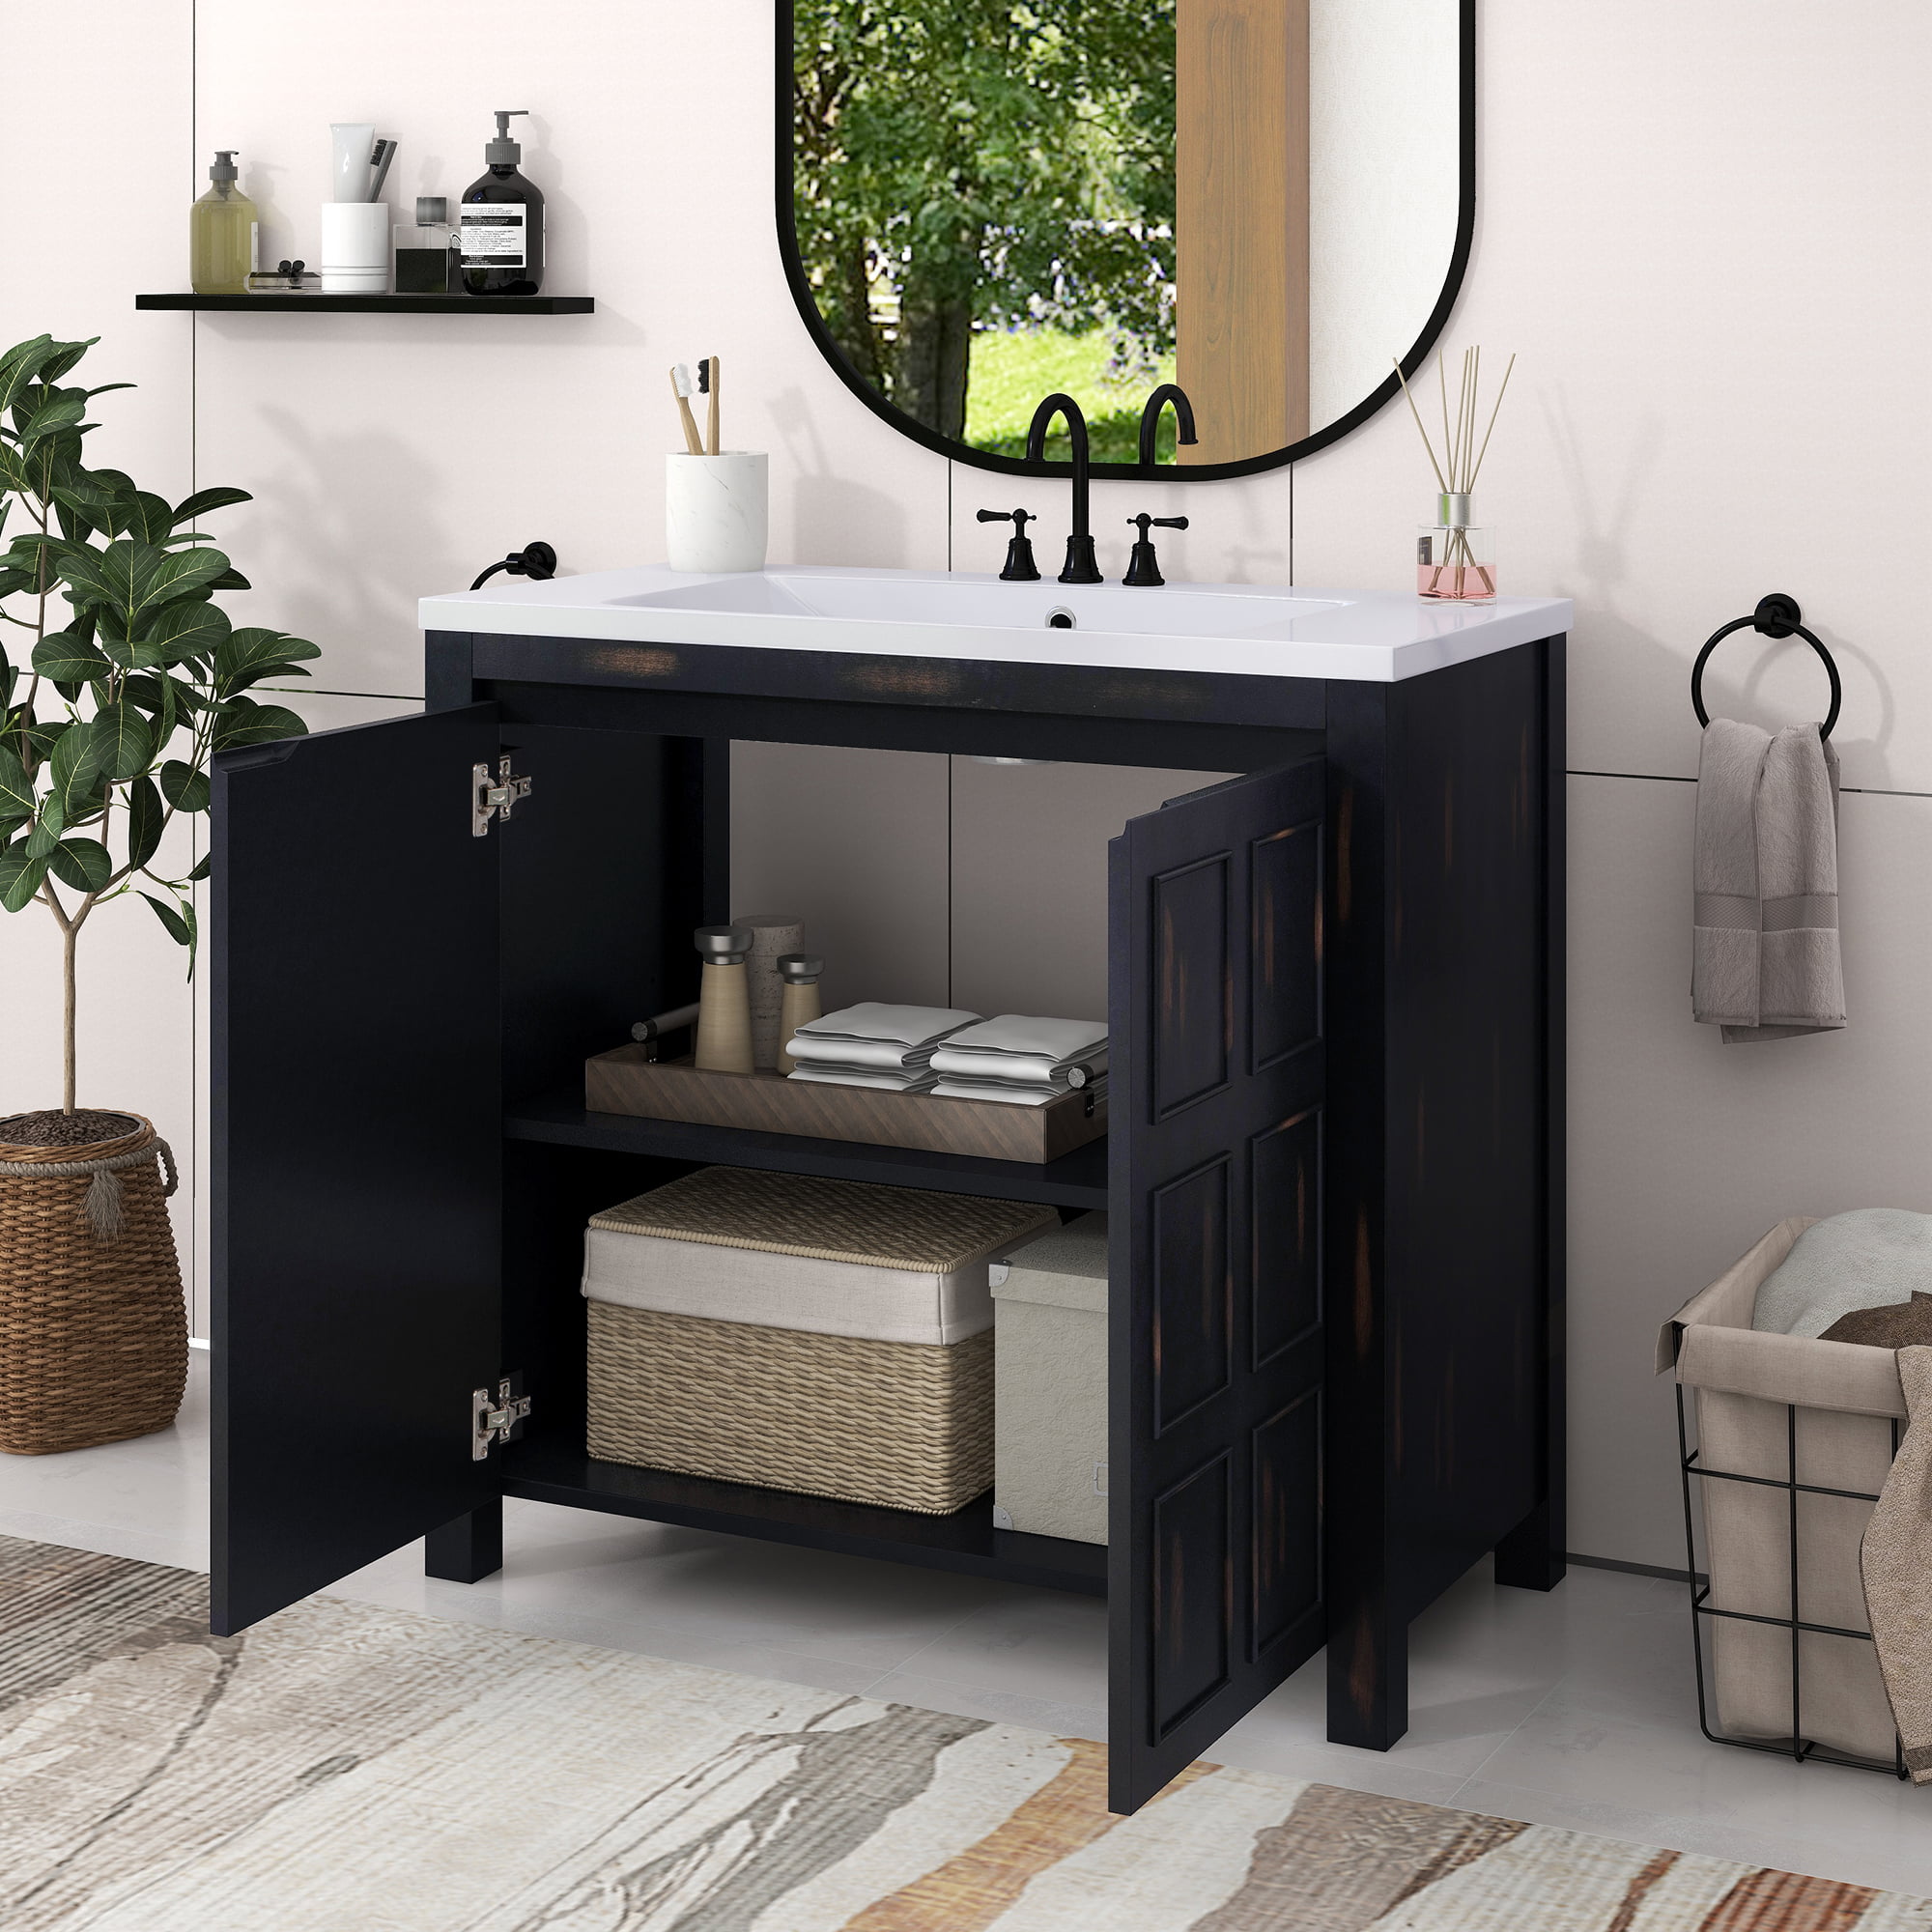 Magic Home 30 in. Black Bathroom Vanity Set Combo Storage Cabinet with Solid Wood Frame and White Sink